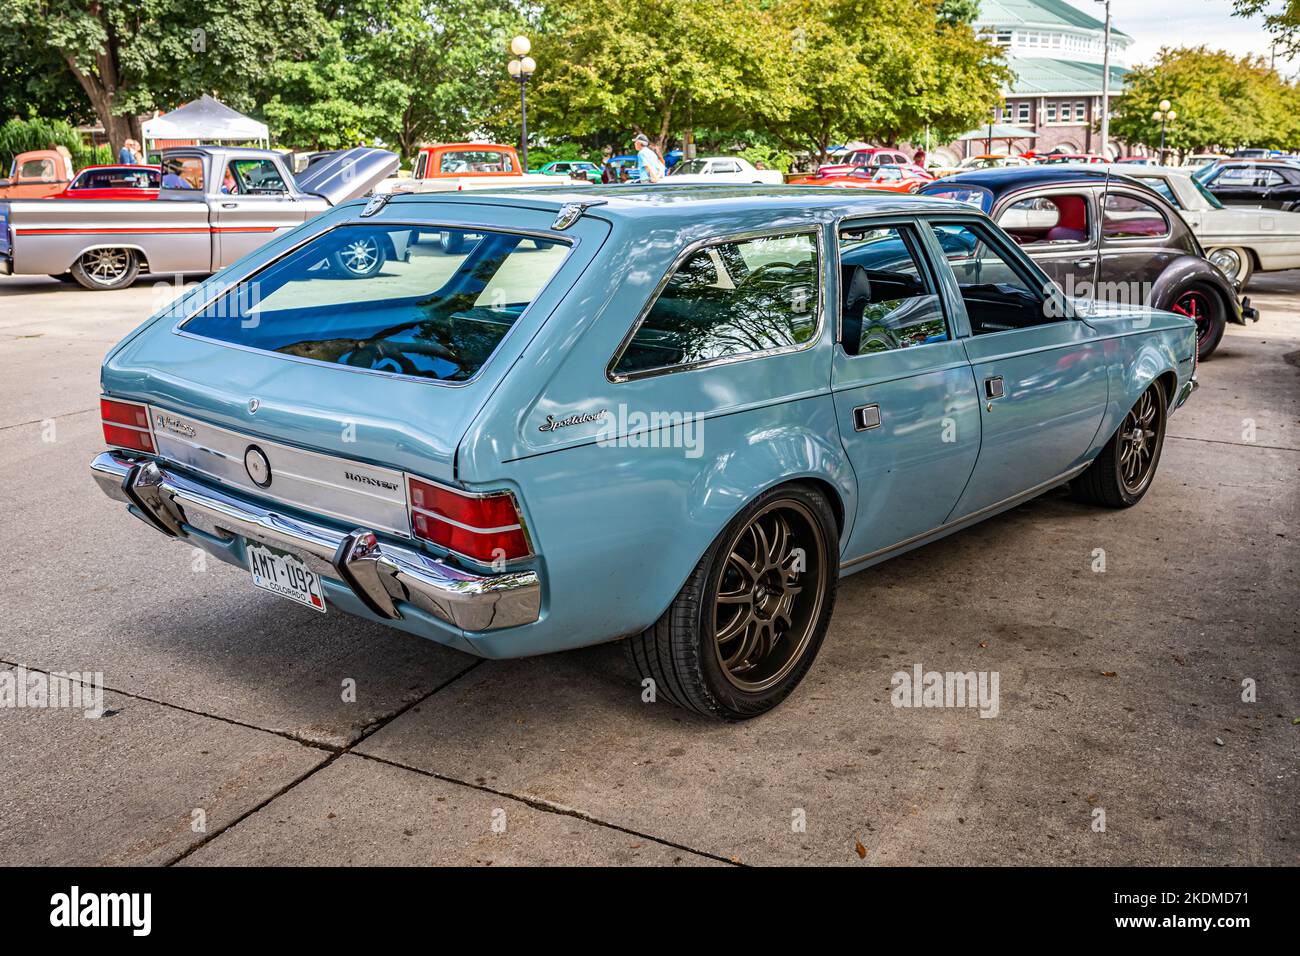 Des Moines, IA - July 01, 2022: High perspective rear corner view of a 1971 AMC Hornet Sportabout Wagon at a local car show. Stock Photo